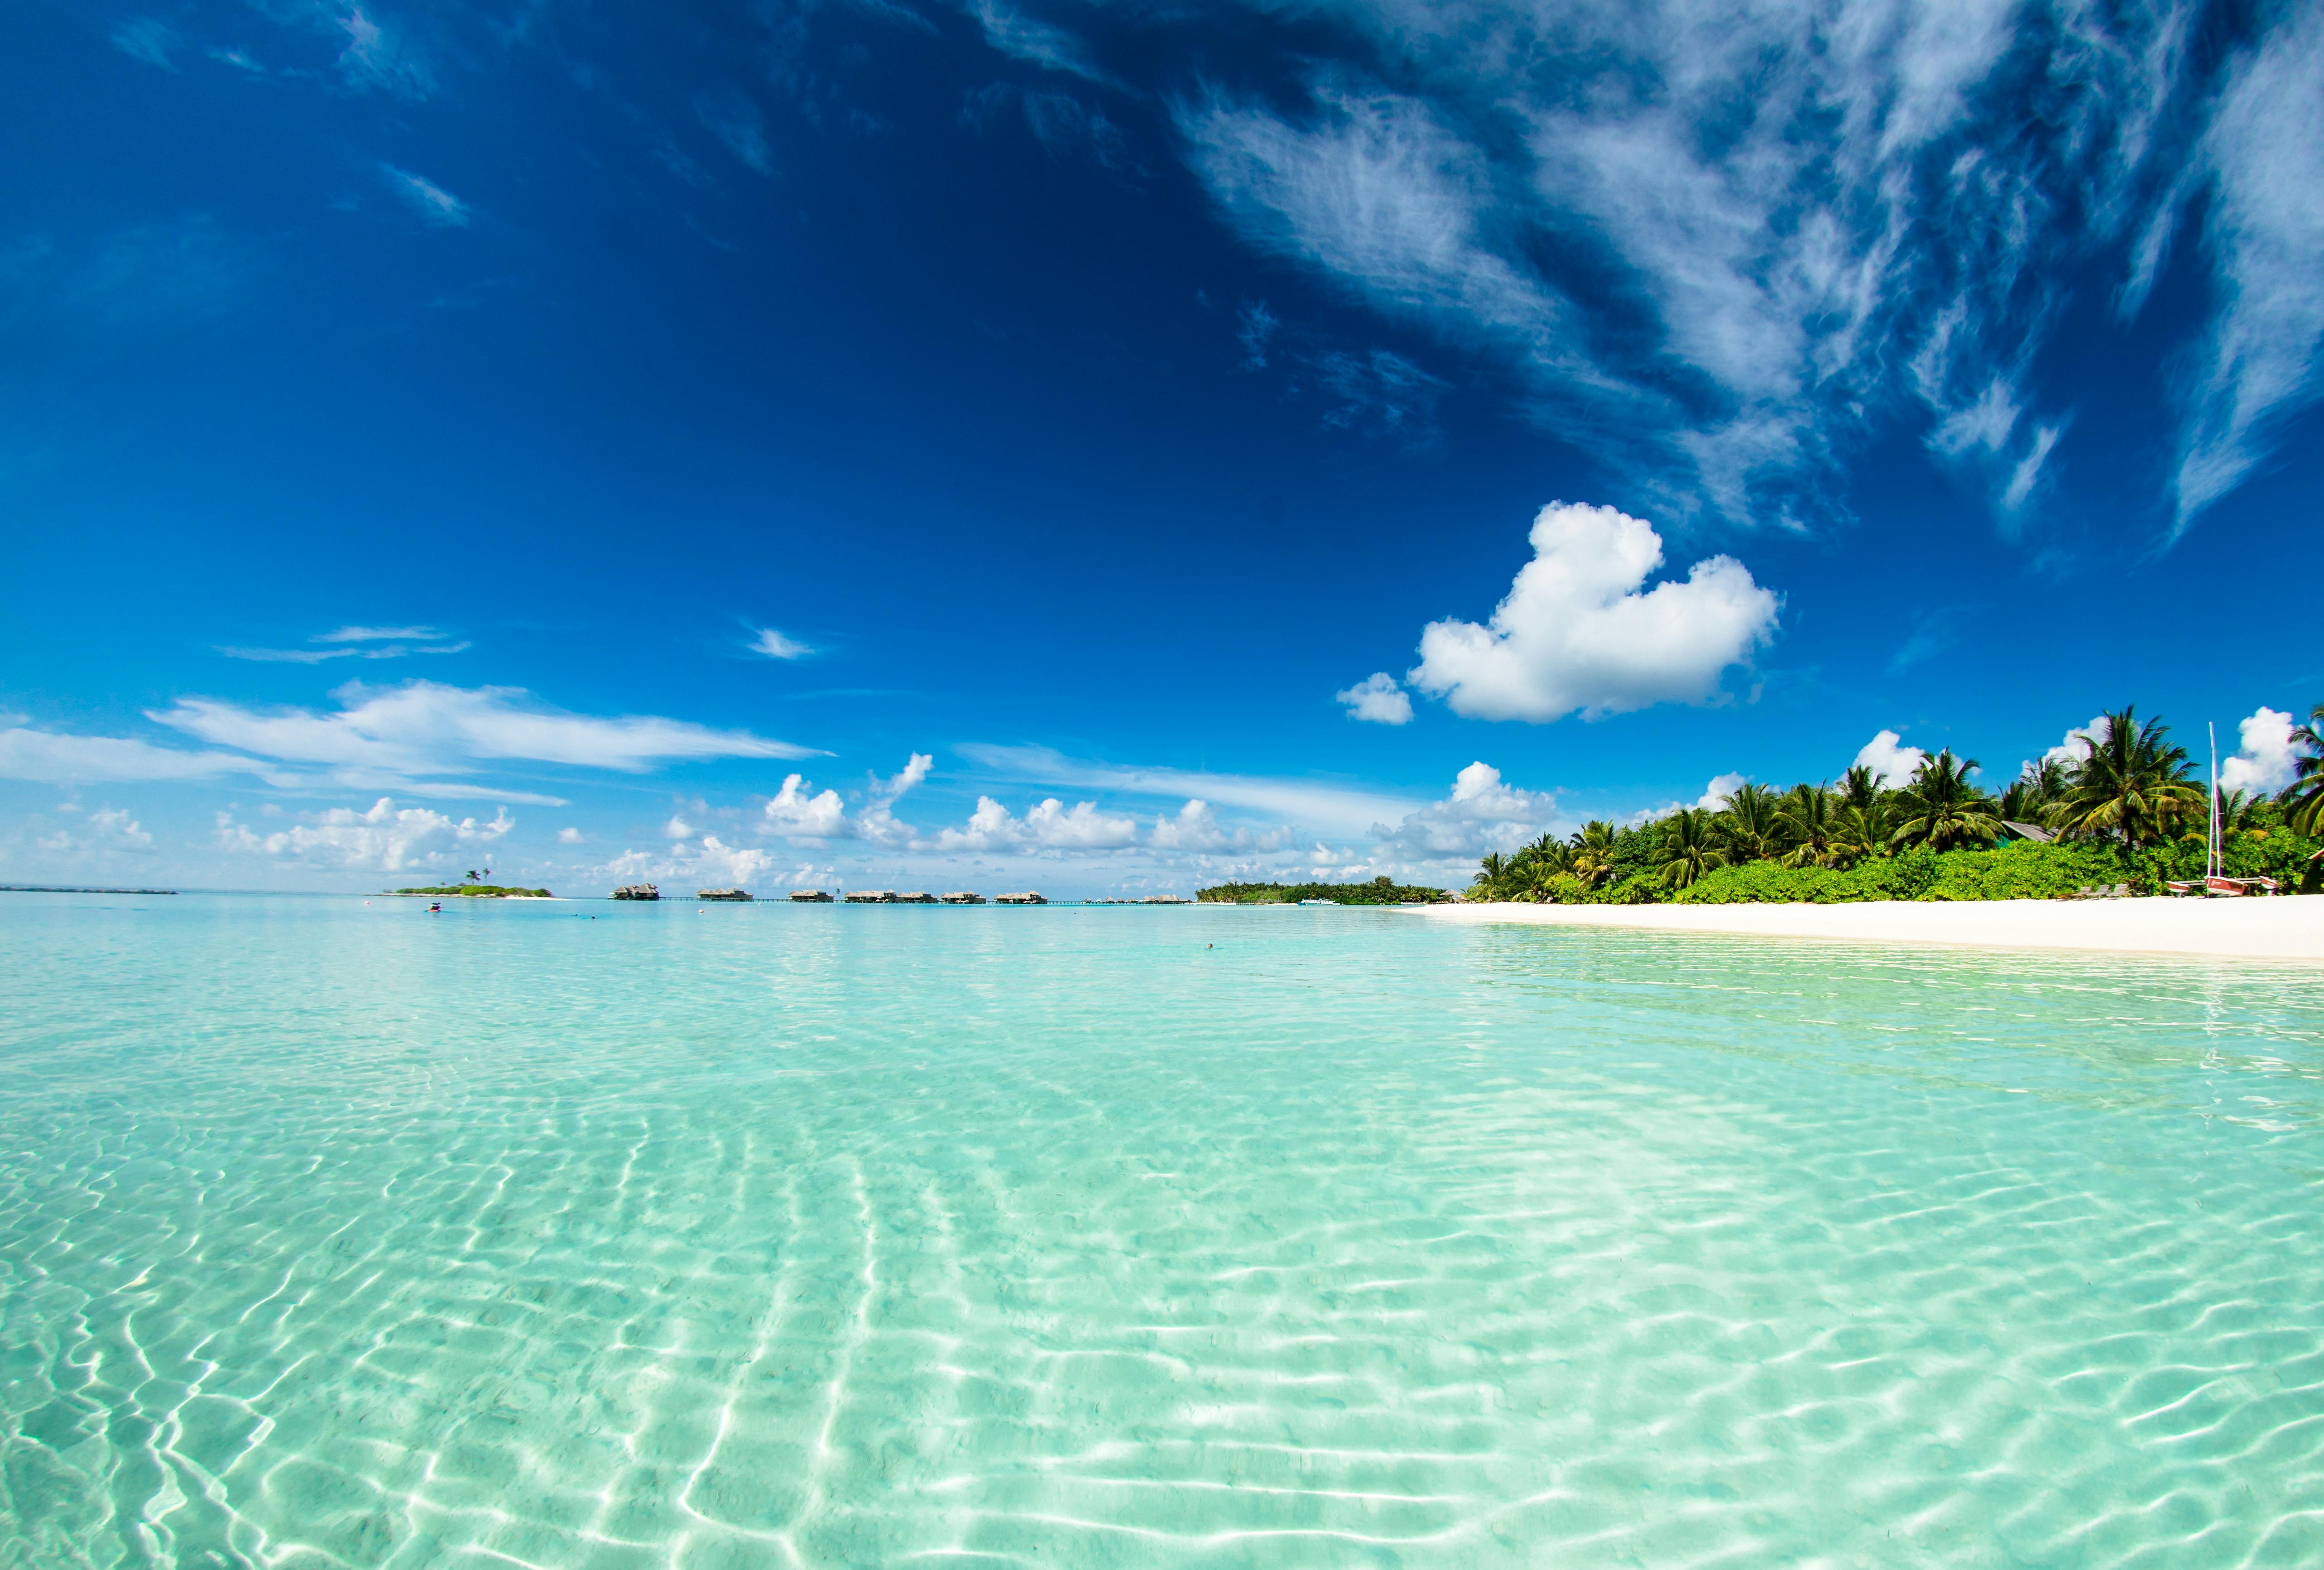 Paradise Photos, Download The BEST Free Paradise Stock Photos & HD Images